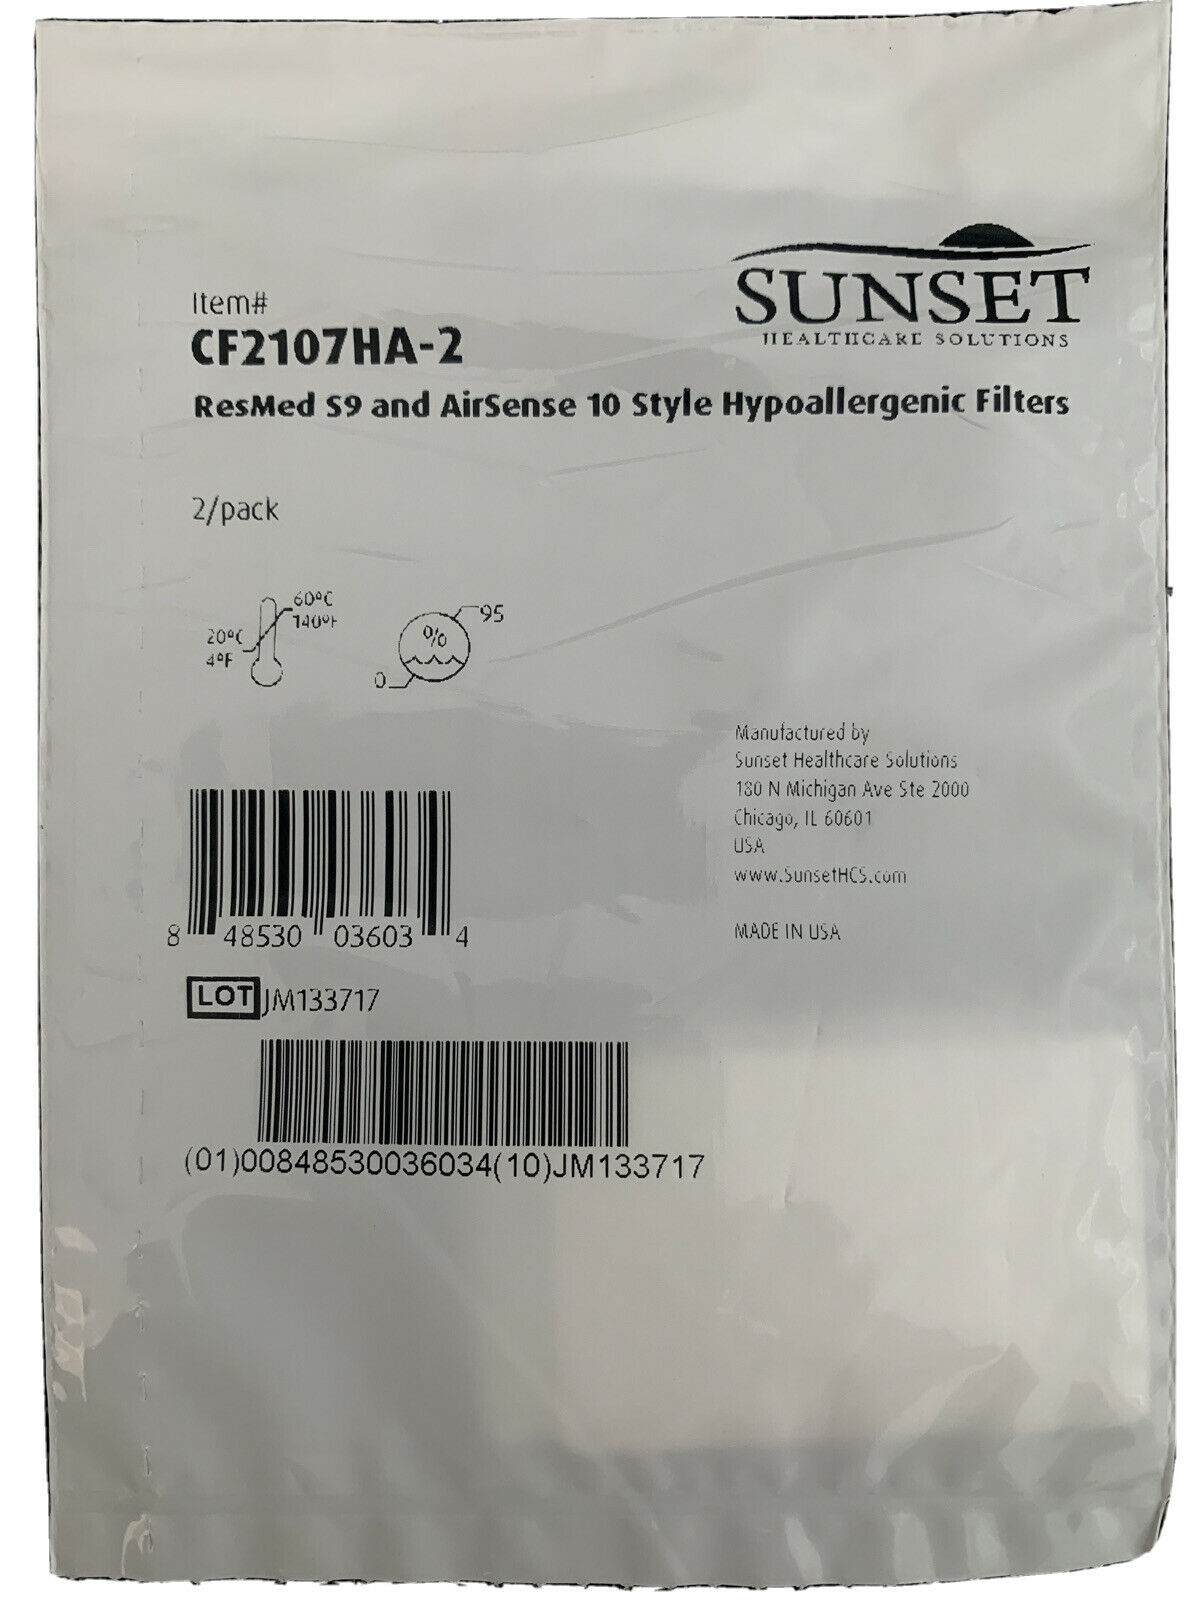 SUNSET CF2107HA-2 ResMed S9 and AirSense 10 Style Hypoallergenic CPAP Filters: Breathe Easy and Sleep Better